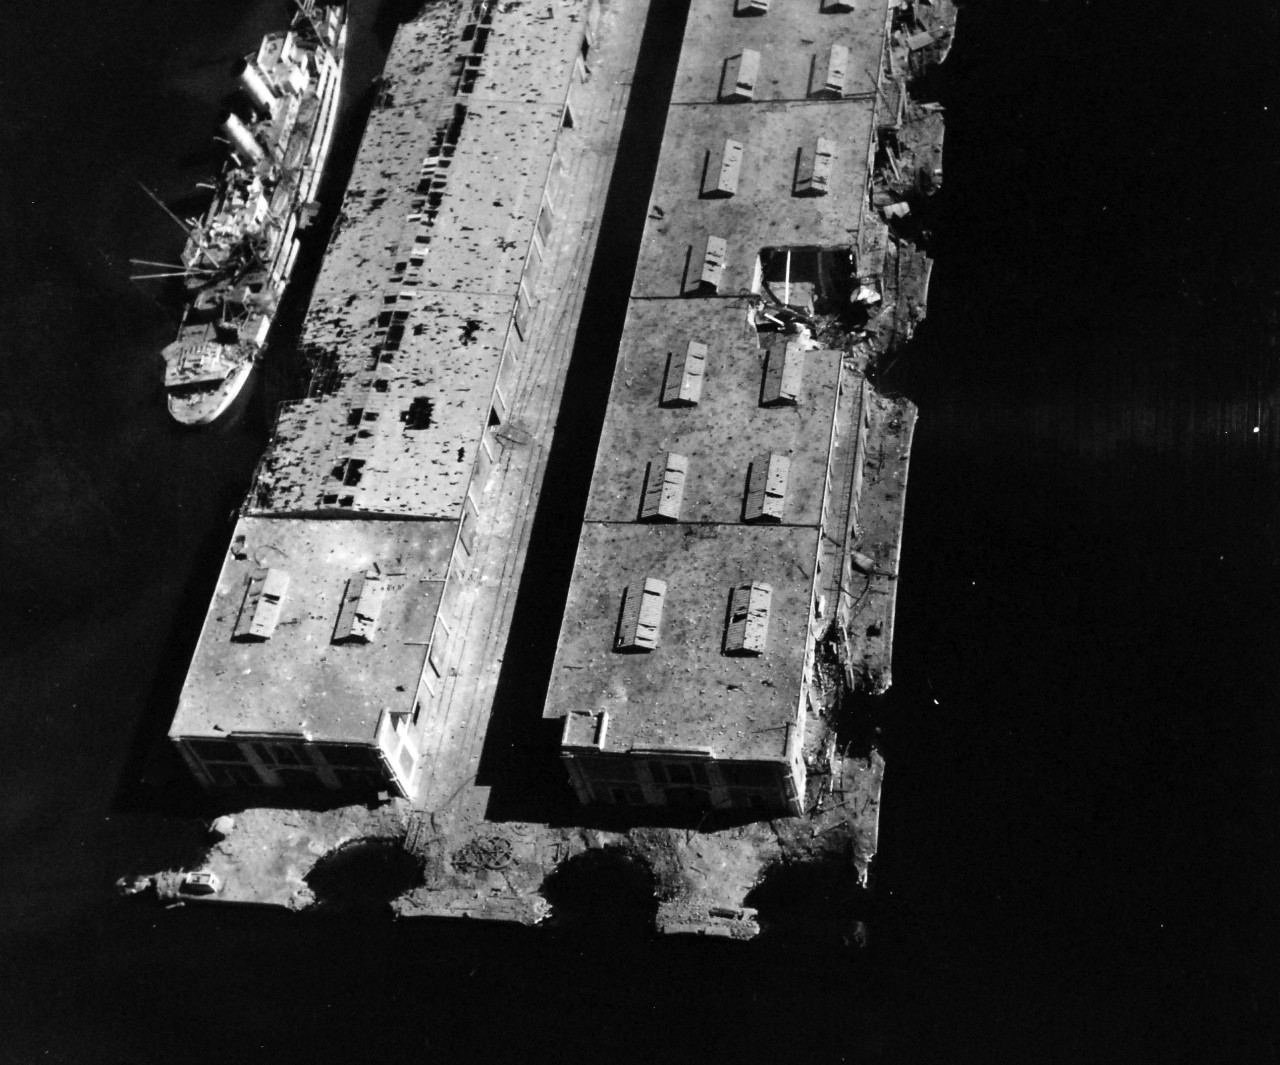 80-G-364053:  Invasion of Southern France, Marseille, August 1944.   Aerial view of the destruction to the harbor and installations at Marseille, France.  Taken by crew of USS Catoctin (AGC-5).  Photograph received on 2 April 1946.   Official U.S. Navy Photograph, now in the collections of the National Archives.  (2014/7/10).